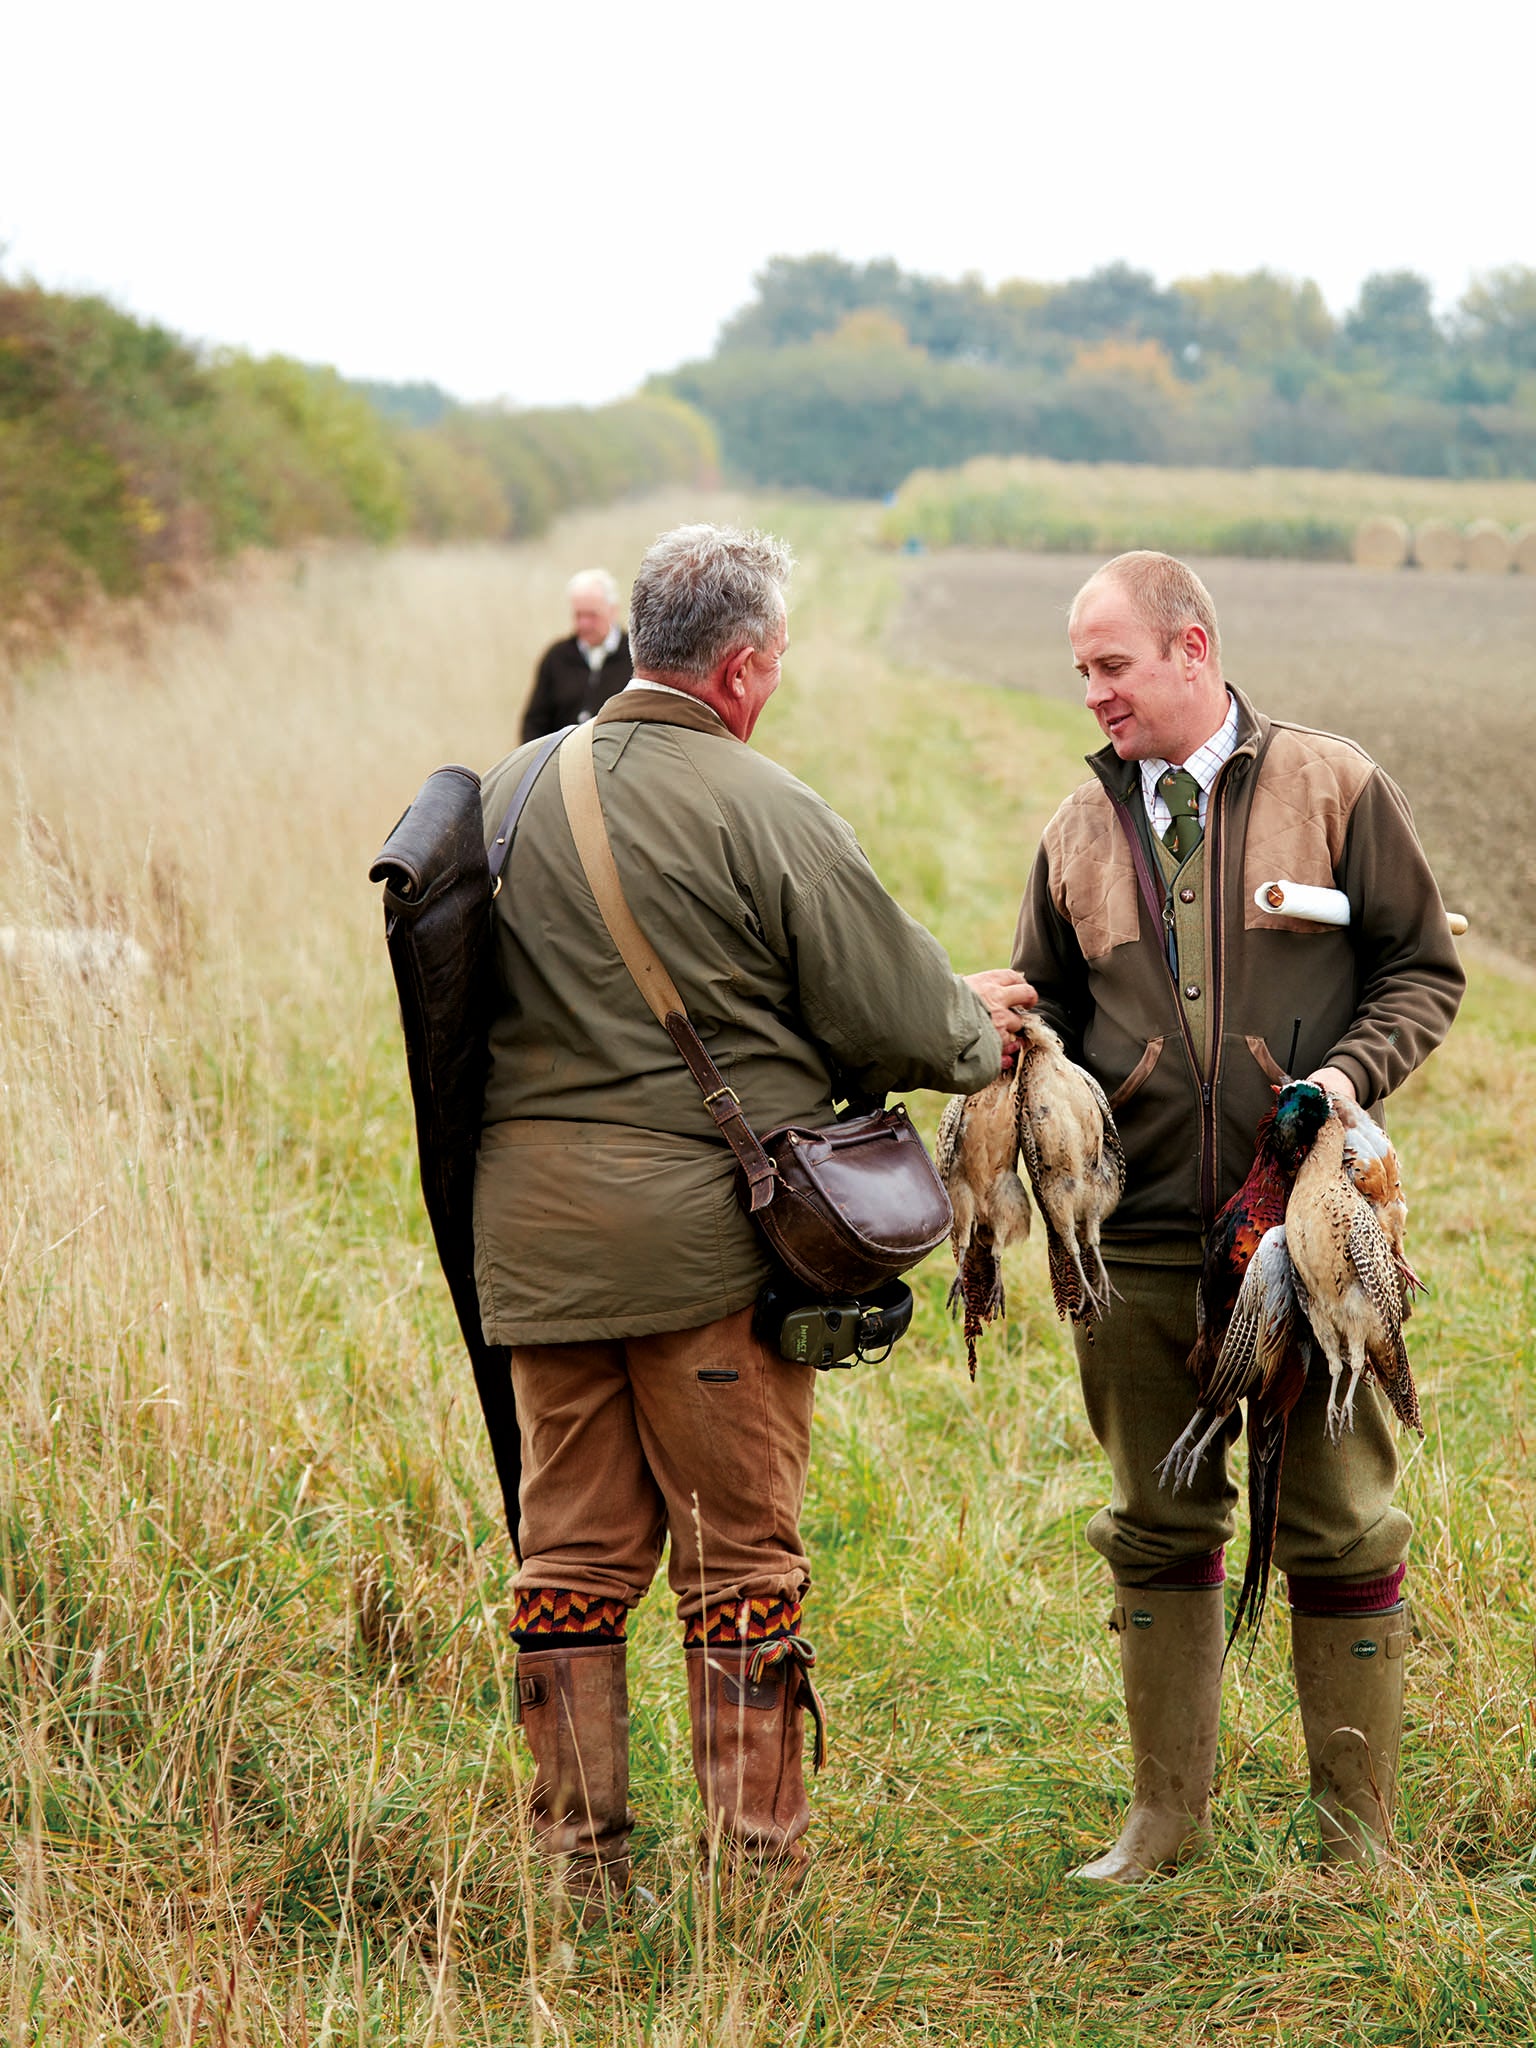 Grouse and pheasant shooting can be very elitist, with some shoots costing £25,000, allowing you to shoot upwards of 600 birds